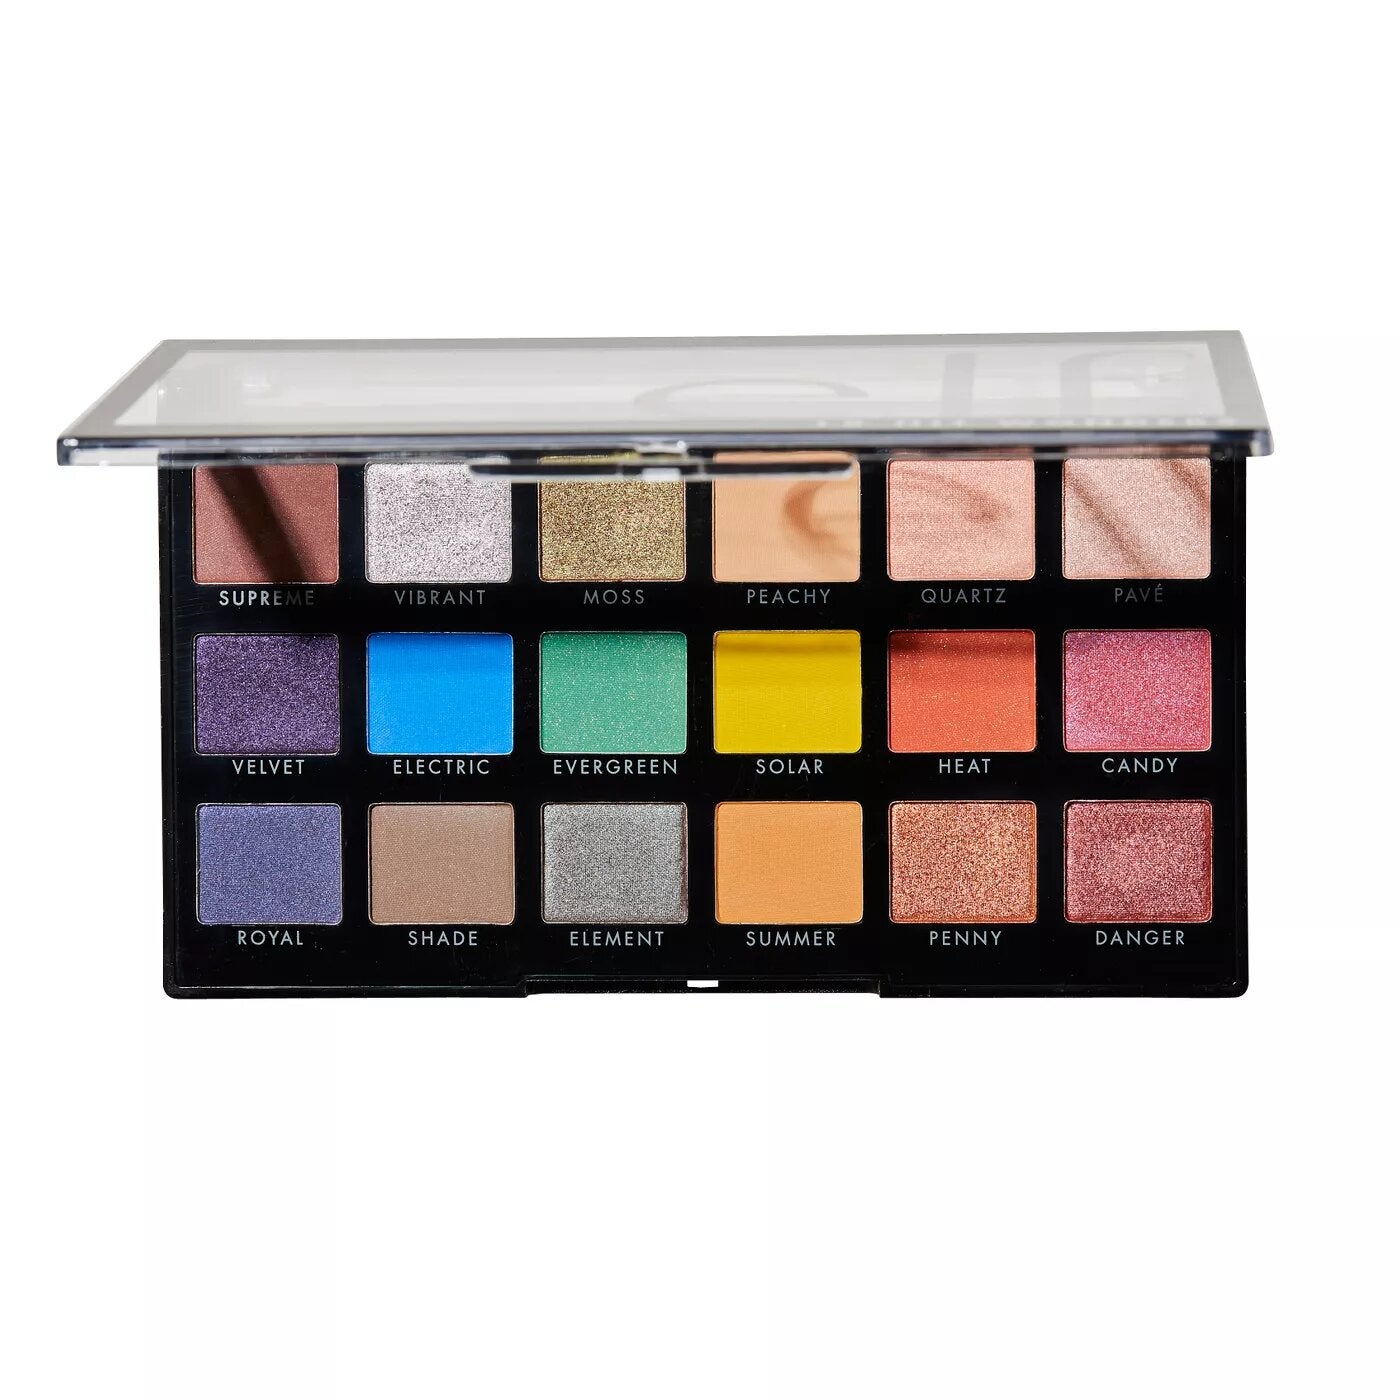 Colorful Eyeshadow Palettes,